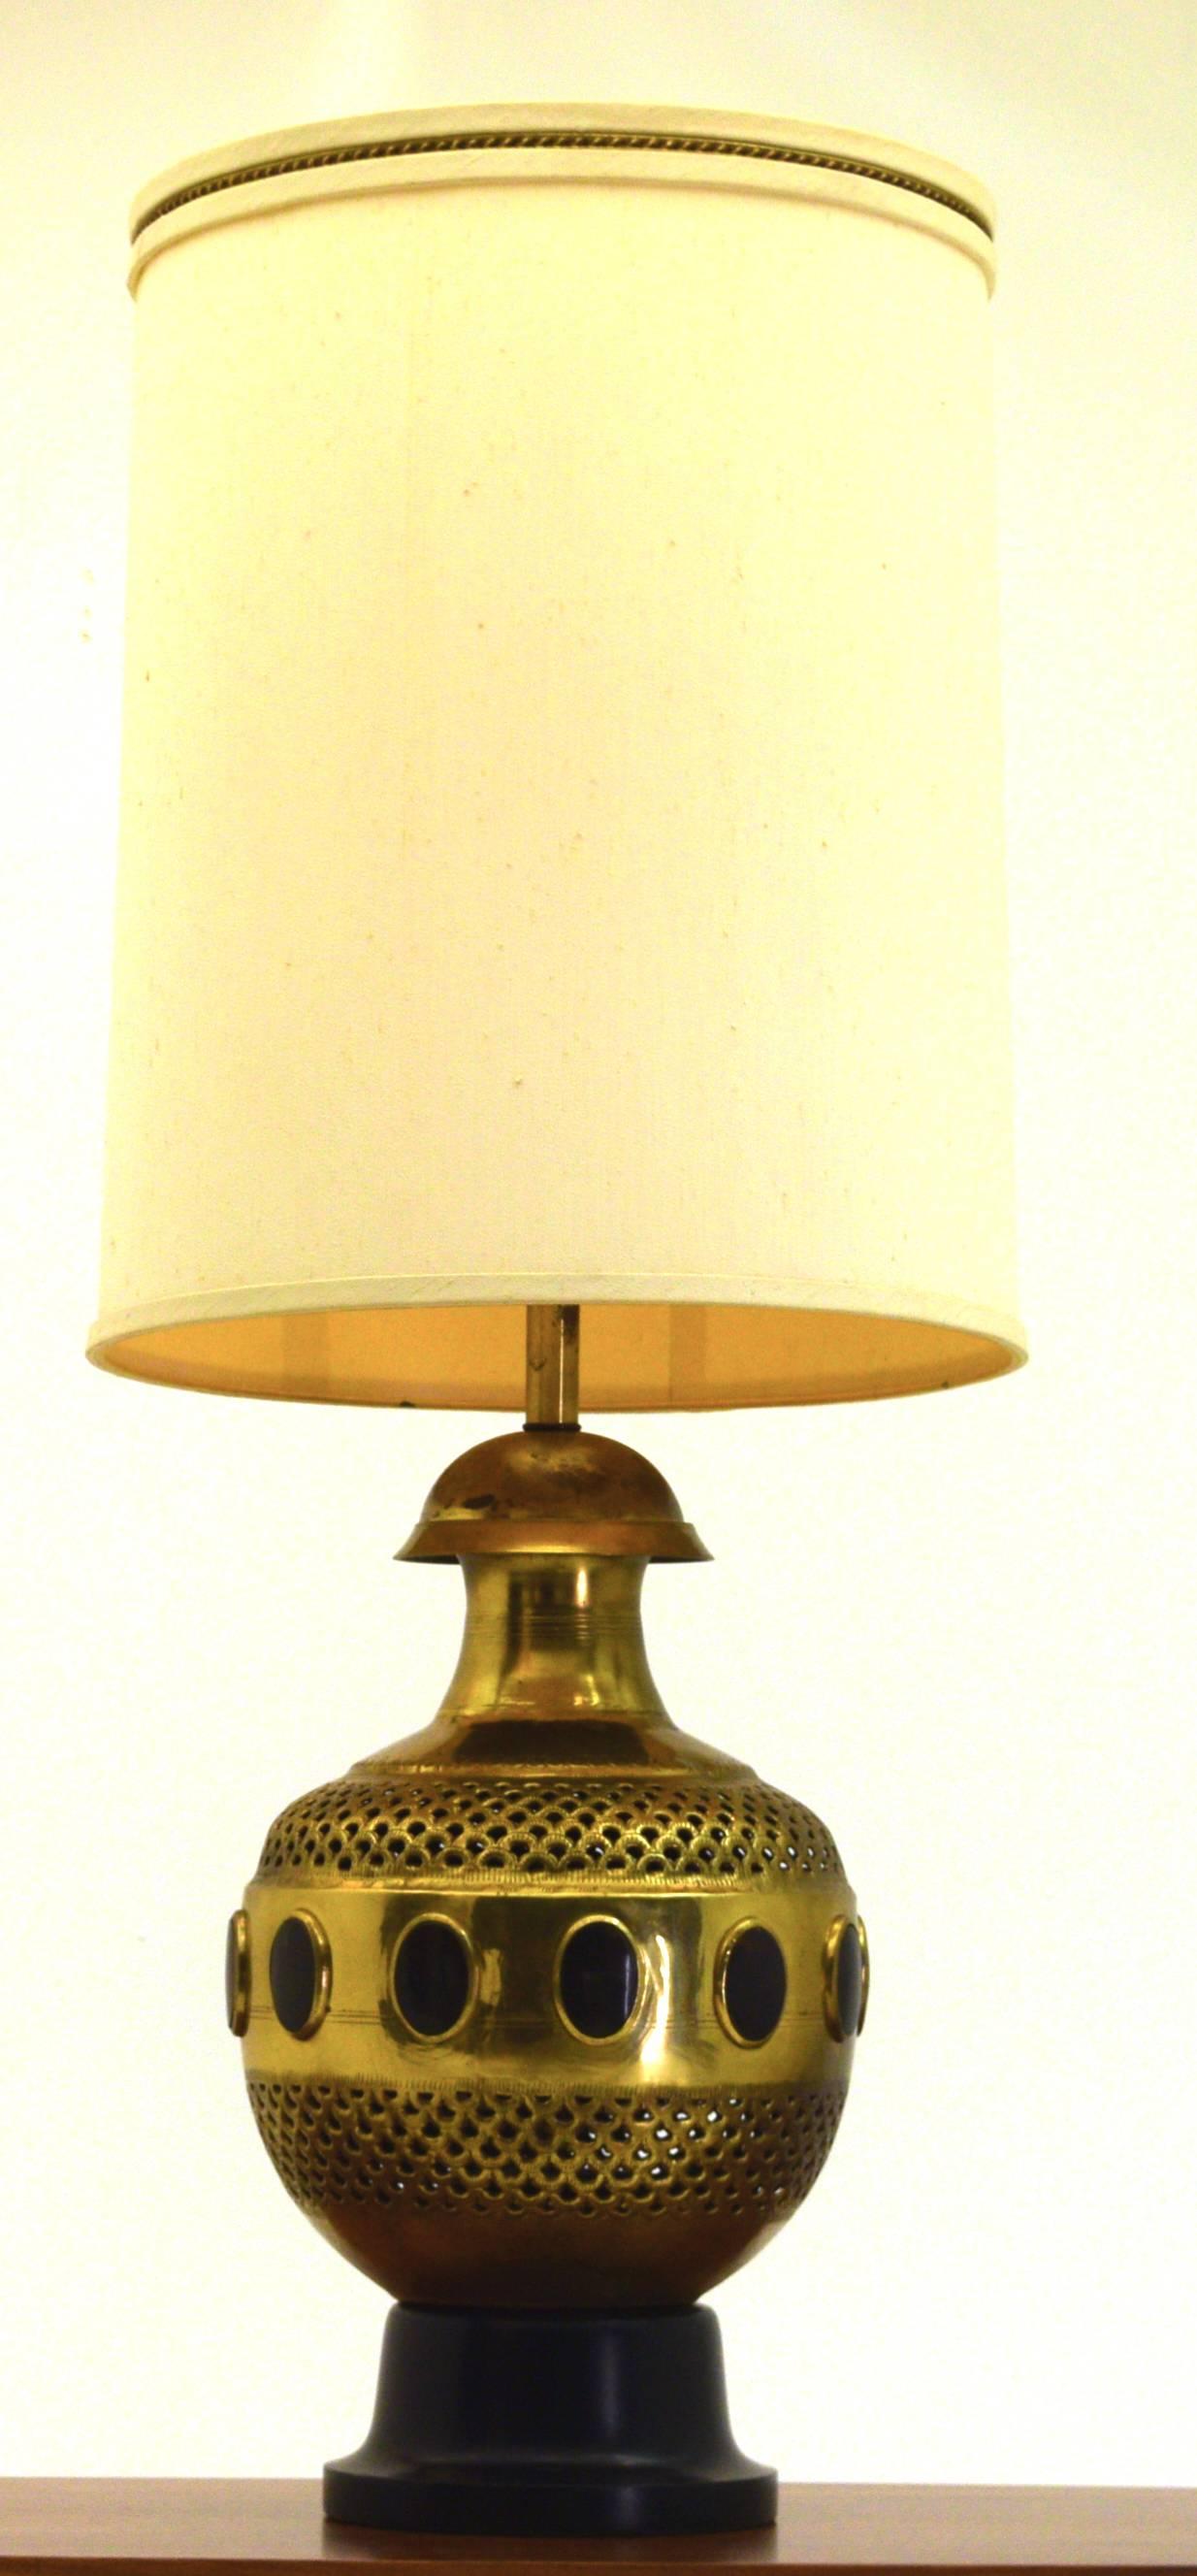 A very large table lamp likely produced by Feldman Lighting, with the work being completed in Europe and imported. Certainly a Moroccan in style and dated to circa 1955. 

Lamp with shade measures 17.5